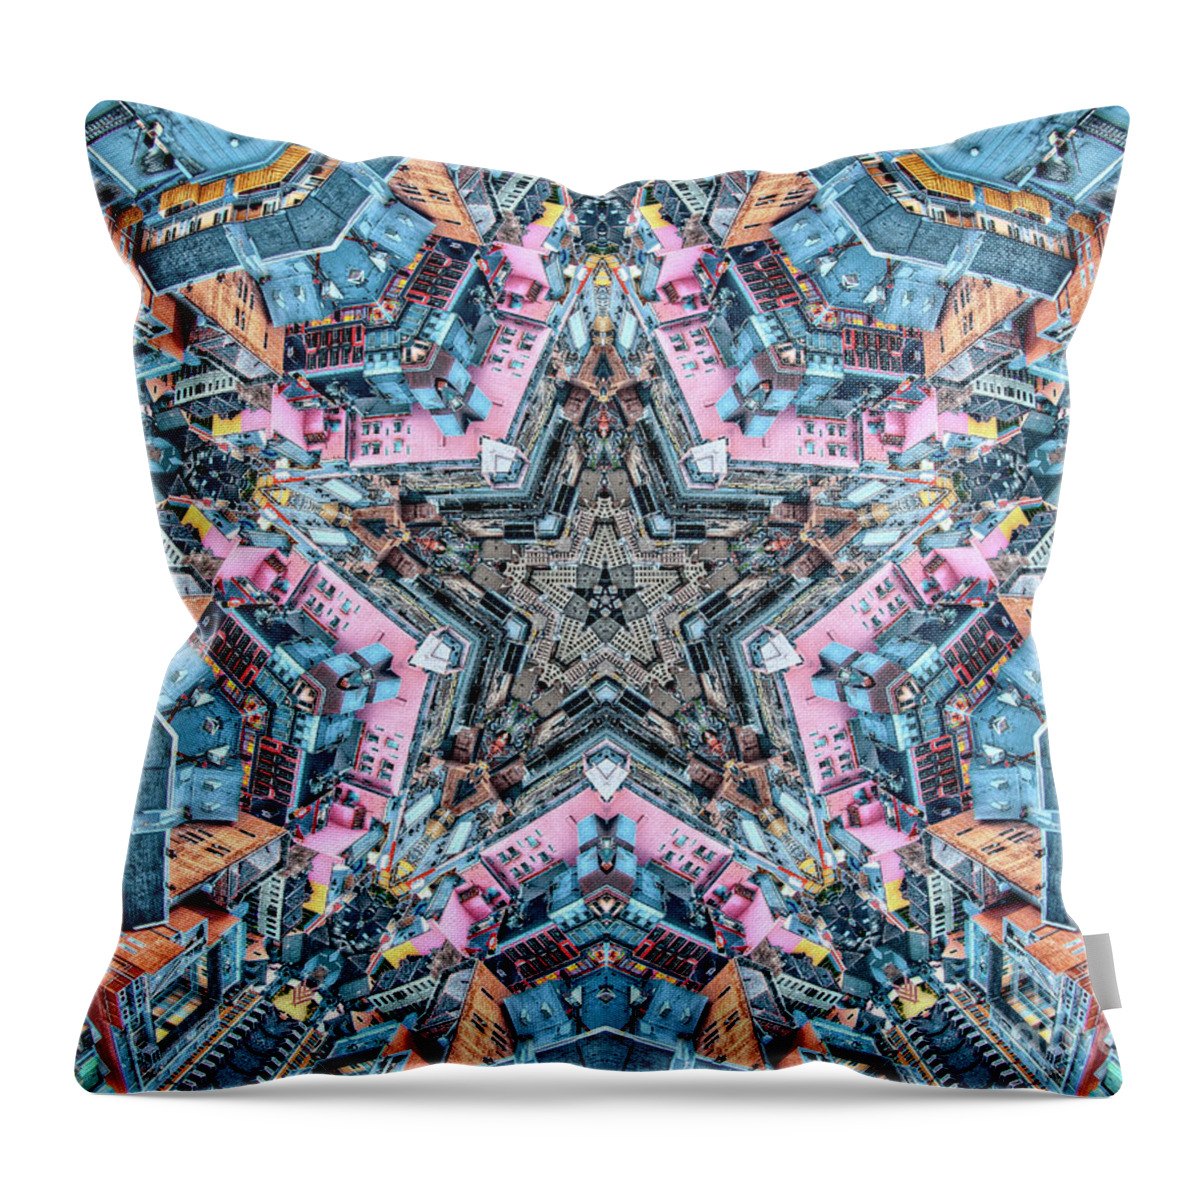 Star Throw Pillow featuring the digital art Star City by Phil Perkins